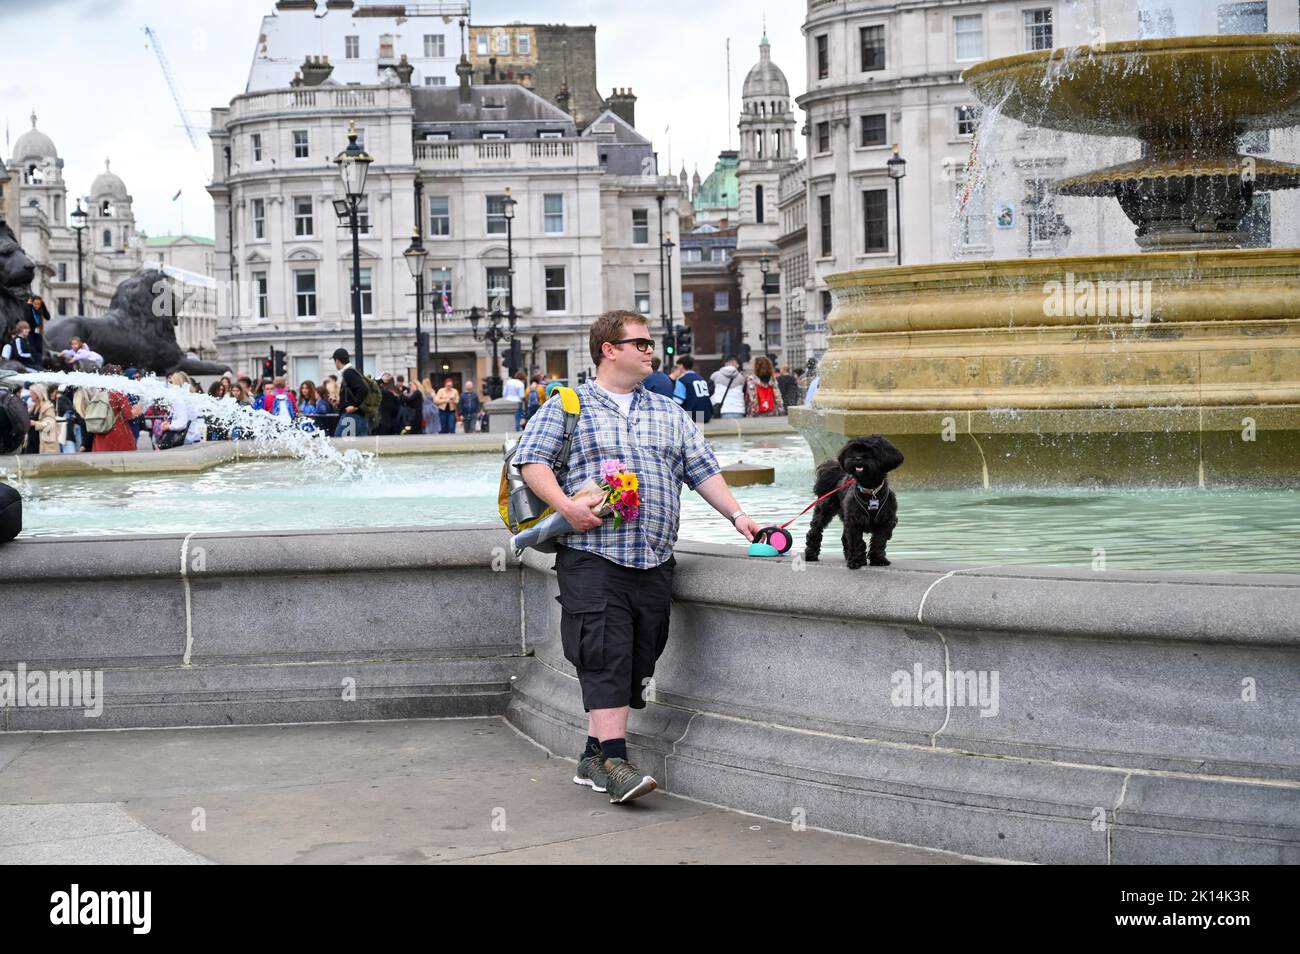 Trafalgar Square London UK - Man with flowers and a dog in the square  Photograph taken by Simon Dack Stock Photo